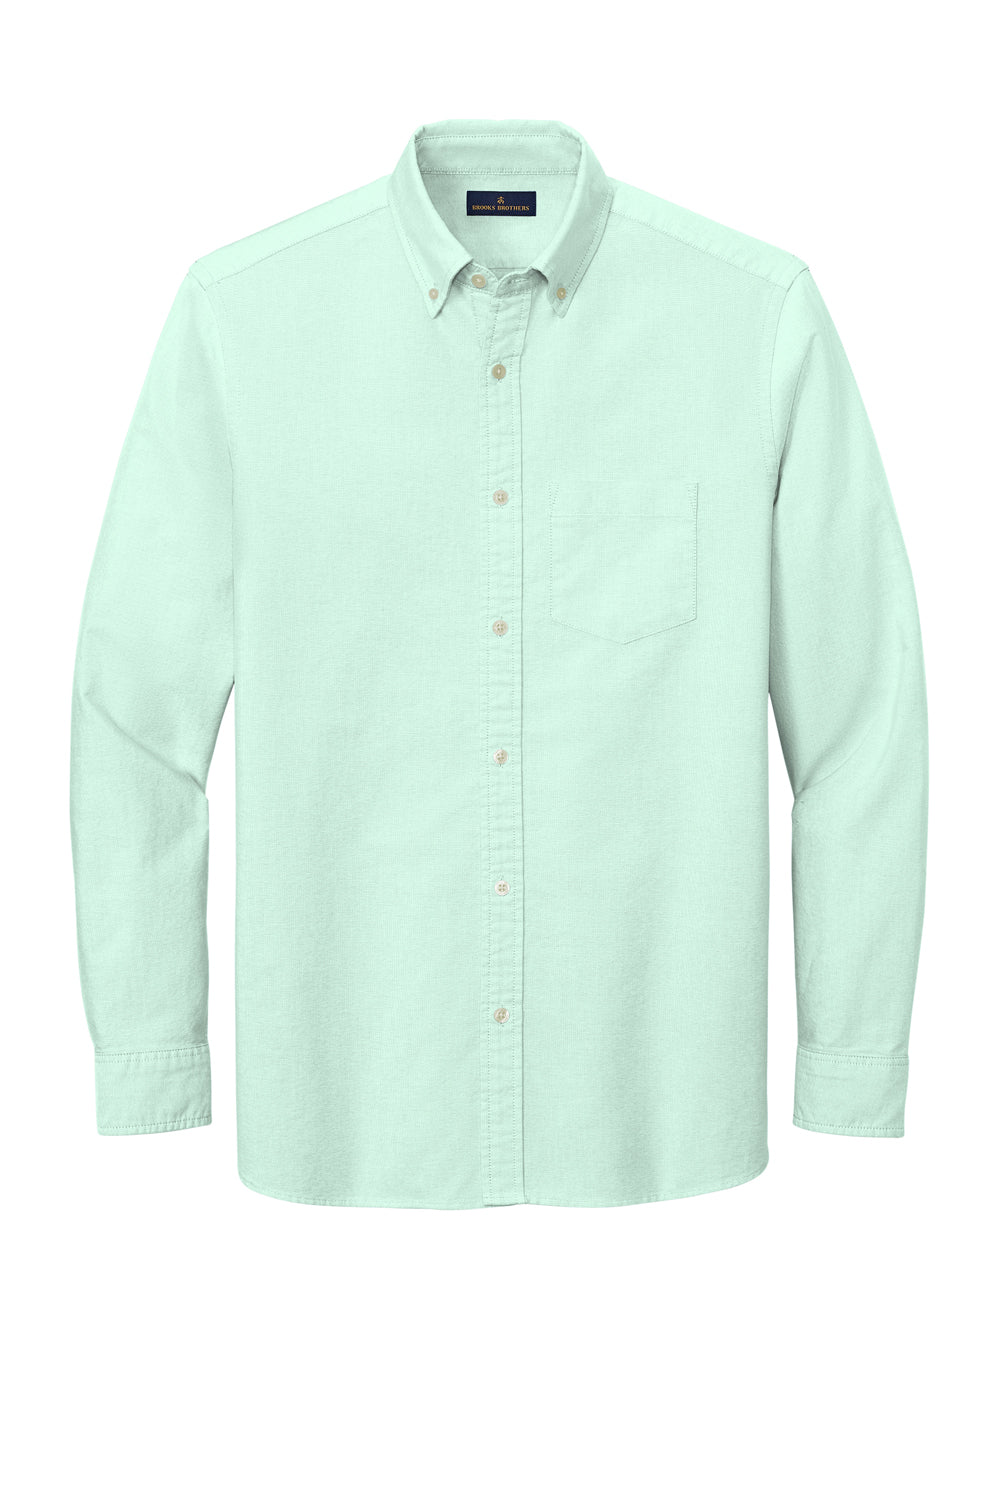 Brooks Brothers Mens Casual Oxford Long Sleeve Button Down Shirt w/ Pocket Soft Mint Green Flat Front